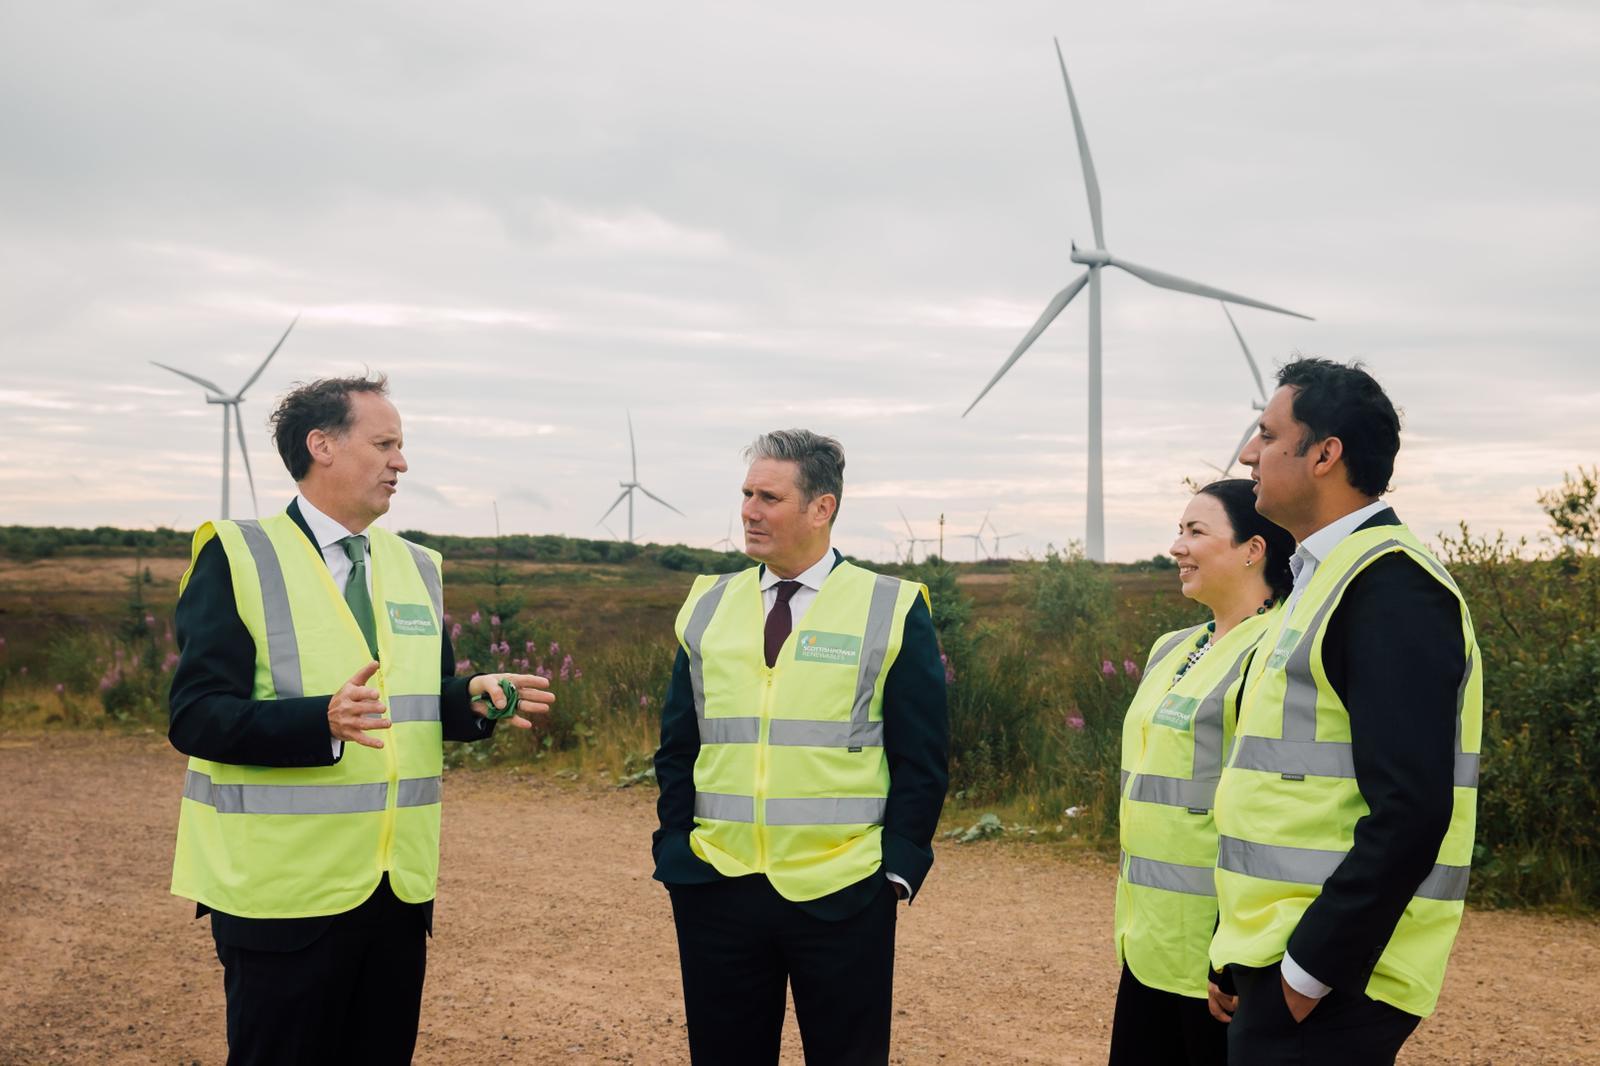 Keir Starmer visits Whitelee Windfarm, the largest onshore windfarm in the UK, in 2021.